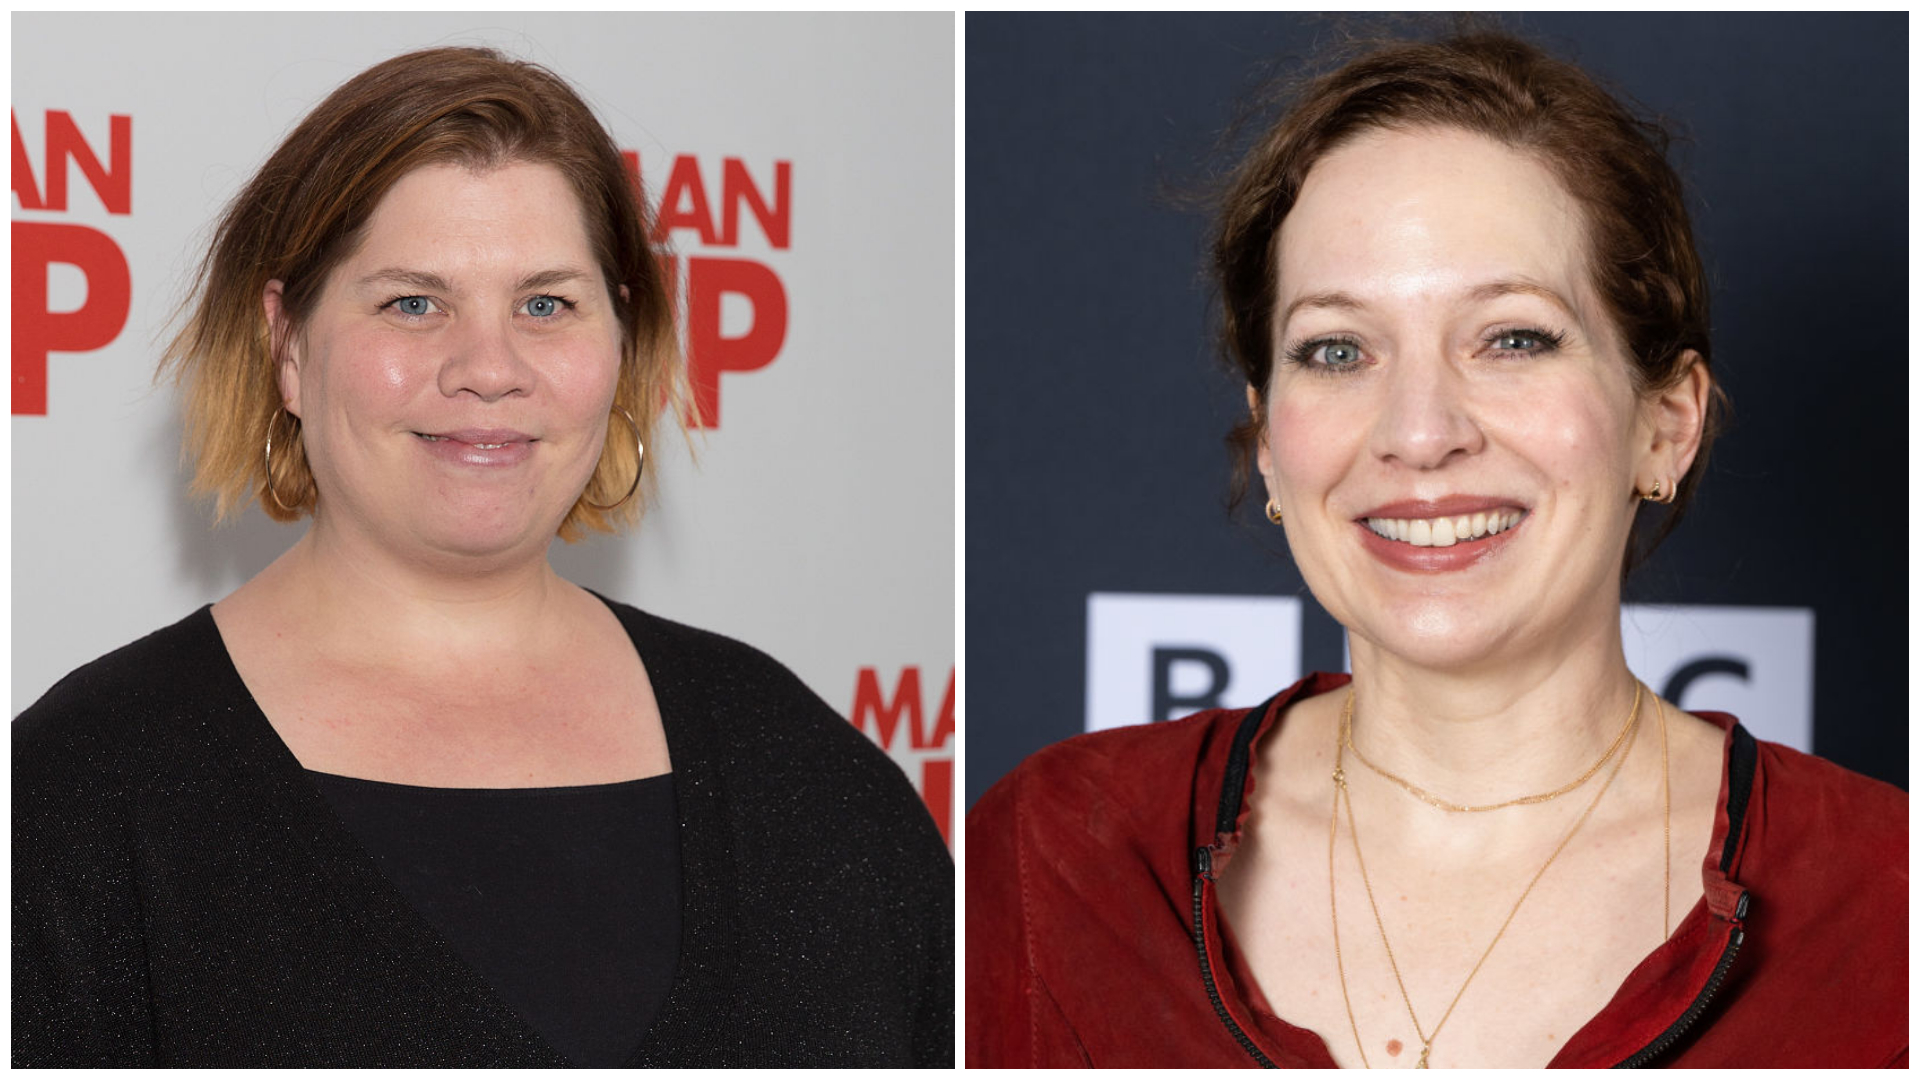 Katy Brand and Katherine Parkinson are the hosts of the comedy podcast, Women Like Us